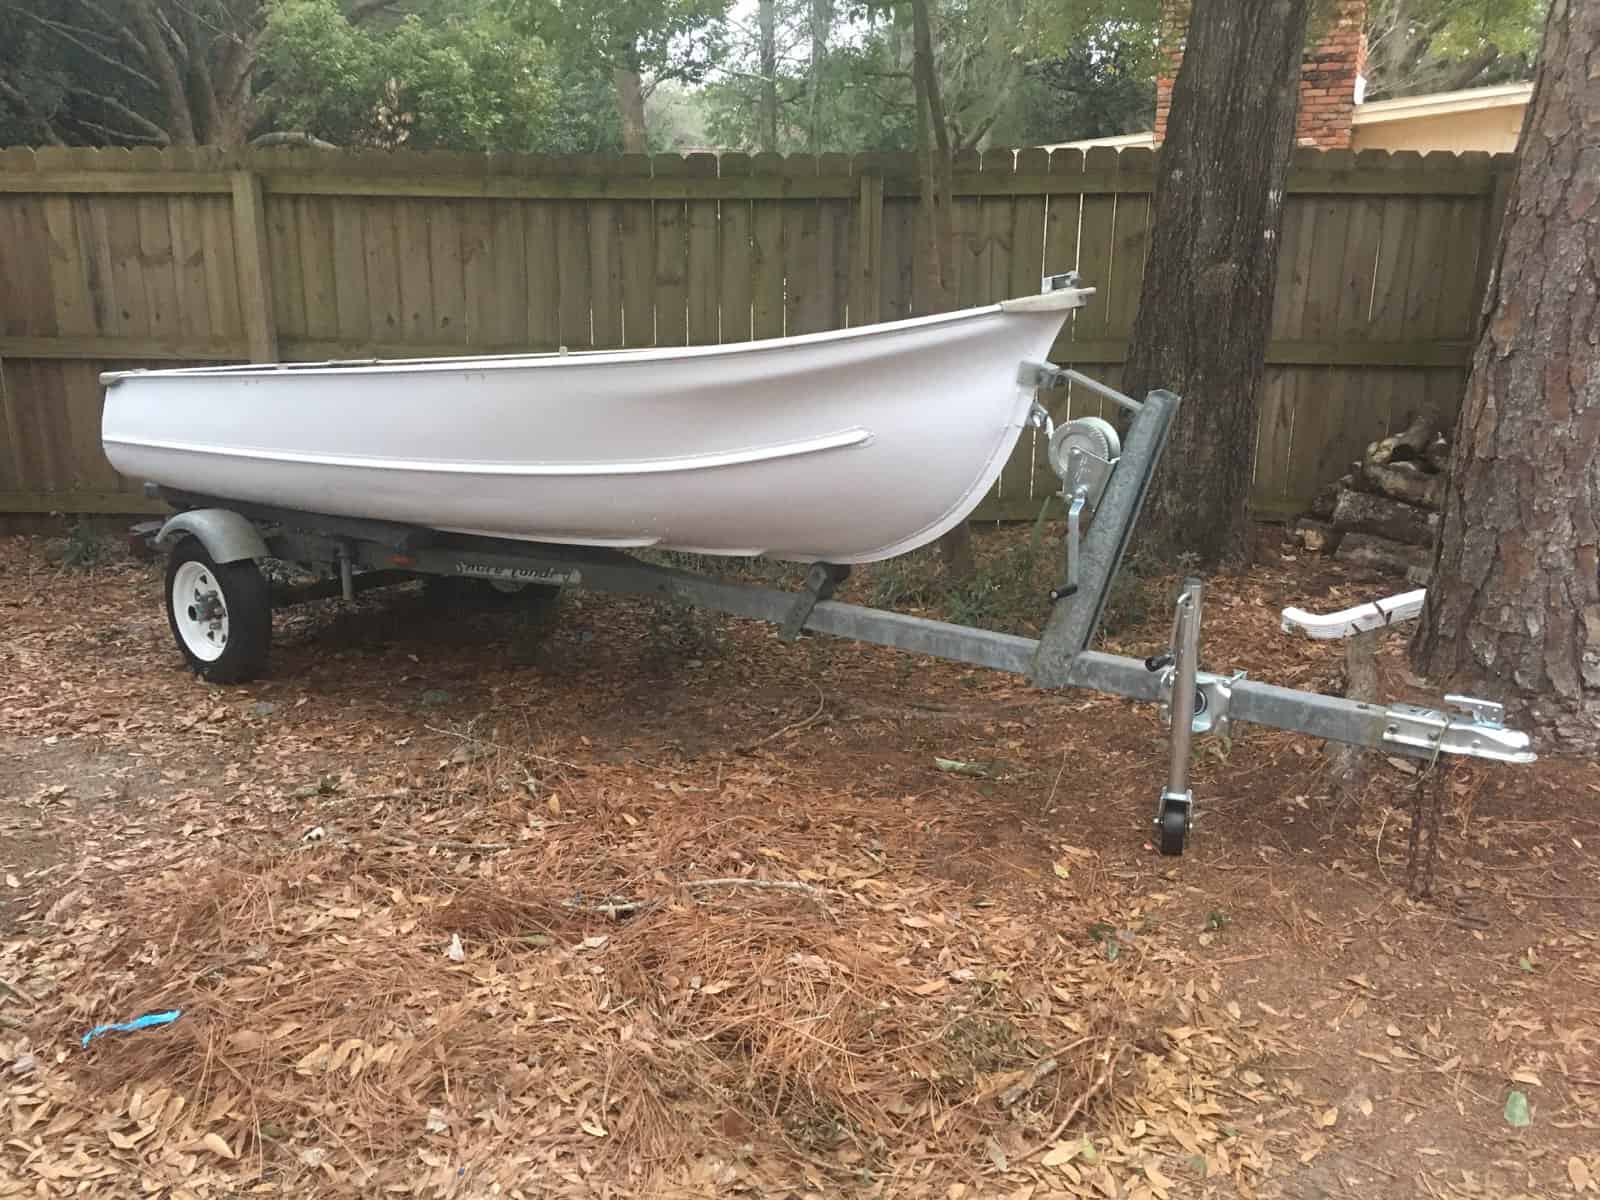 Forum on Microskiff – a 12ft Aluminum Boat Build